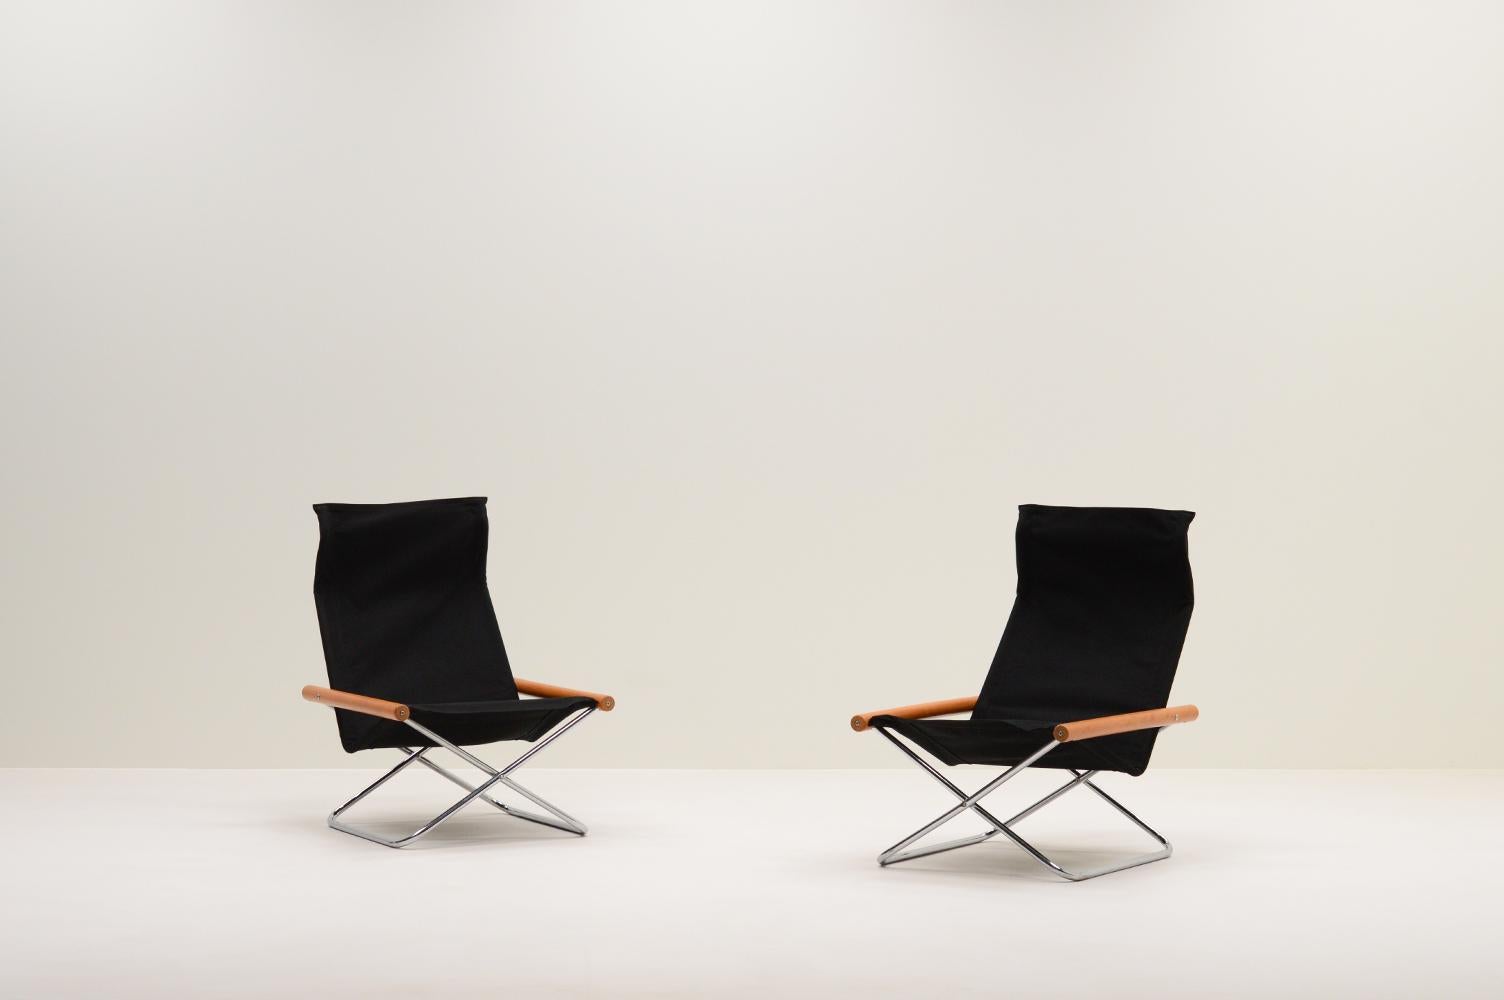 Set of 2 NY chairs by Takeshi Nii, 1950s Japan. Minimalistic folding chairs with a chrome X-base, beech wood arm rests and reupholstered black canvas seat.  The chair was named NY after the designer’s family name and meaning new in Danish. This